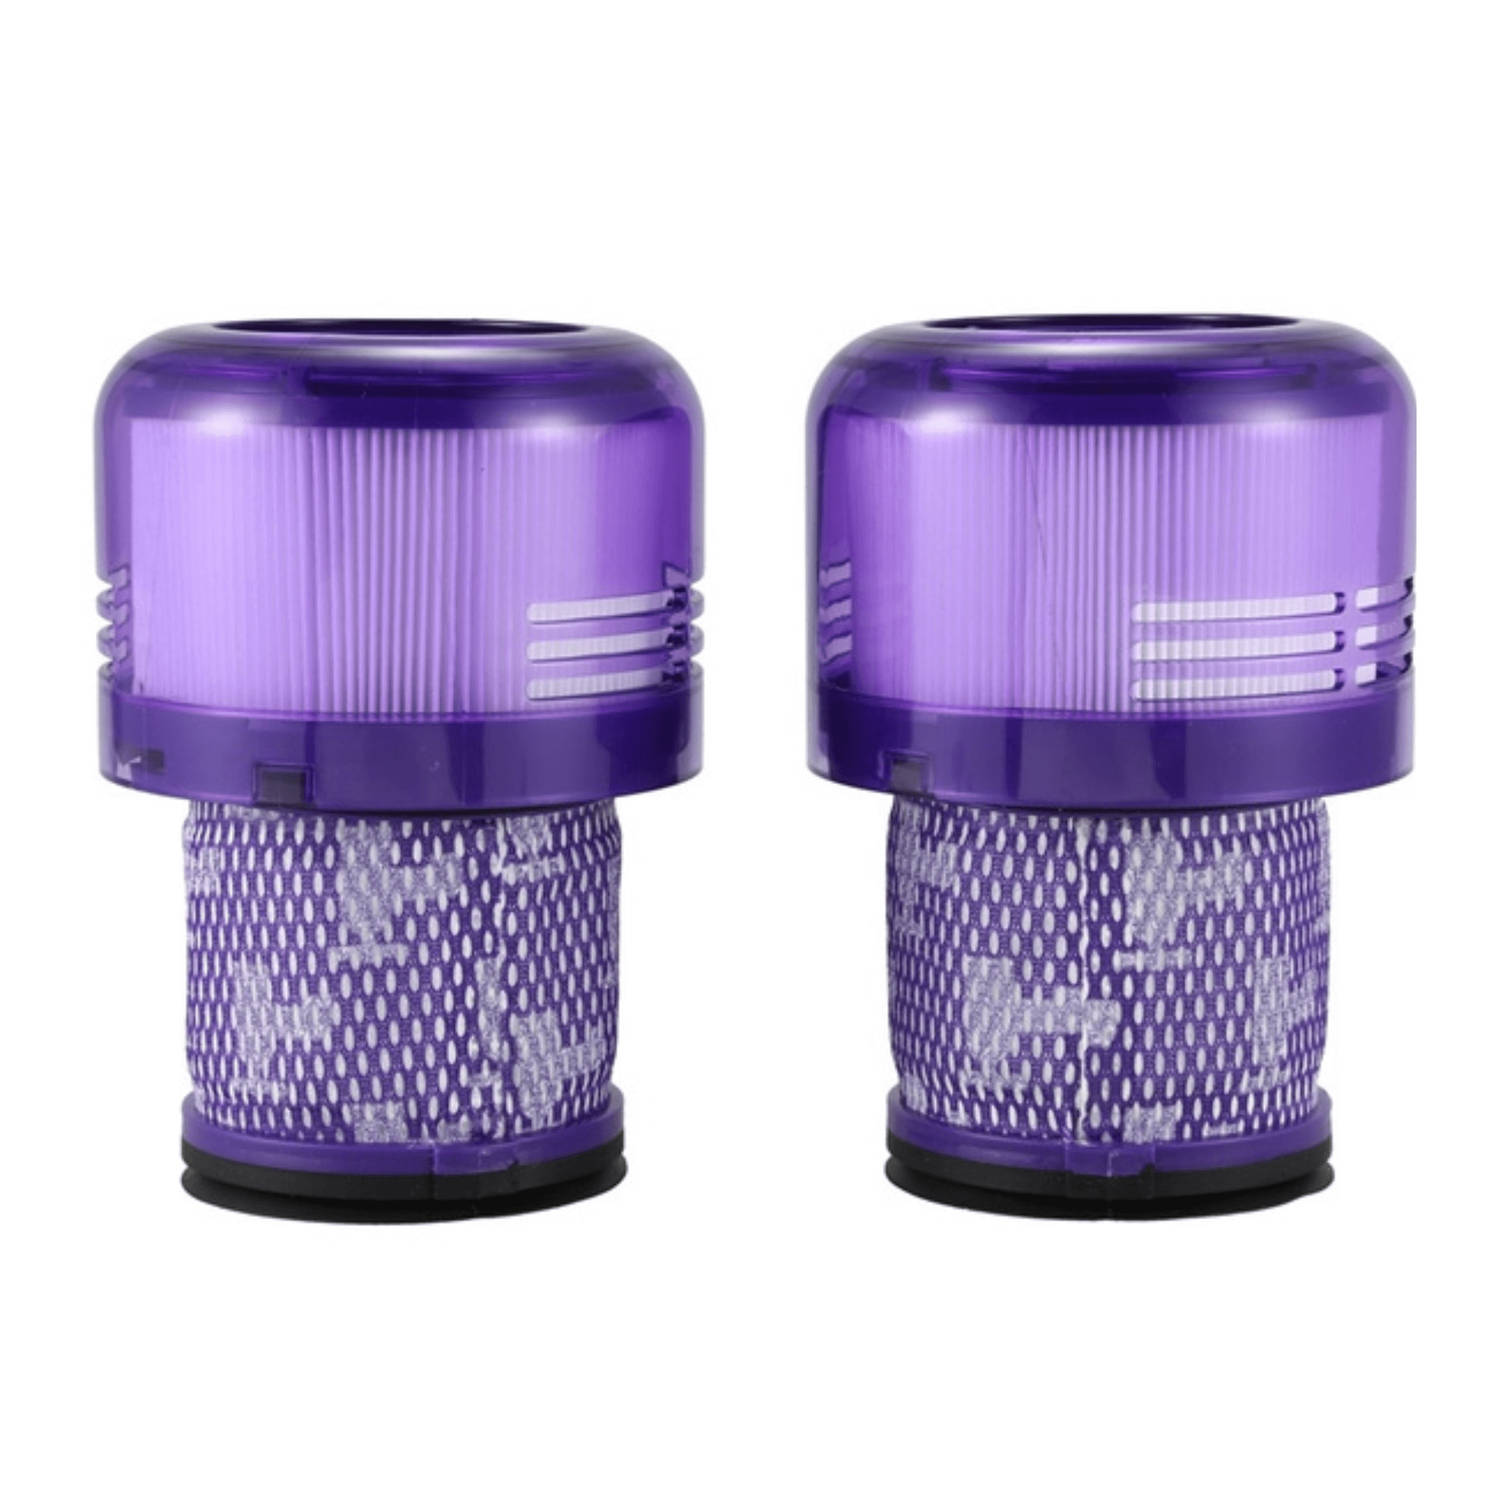 2x Hepa Filter Voor Dyson V11 Sv14 Stofzuiger Absolute Pro Total Clean Parquet Animal Torque Drive